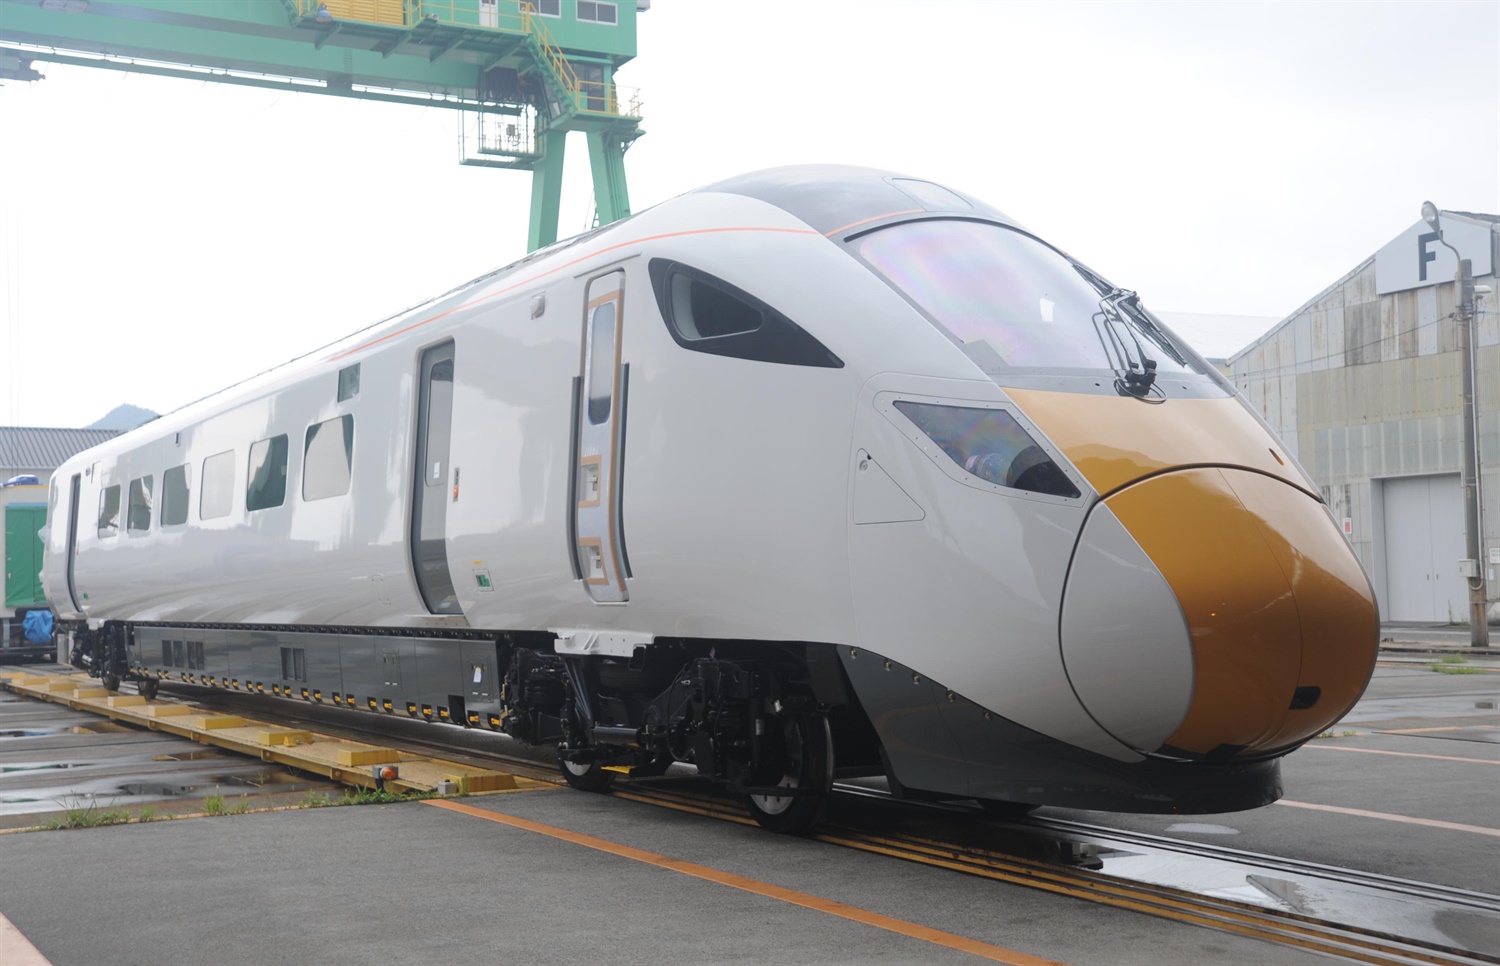 Hitachi’s Newton Aycliffe site connected to rail network